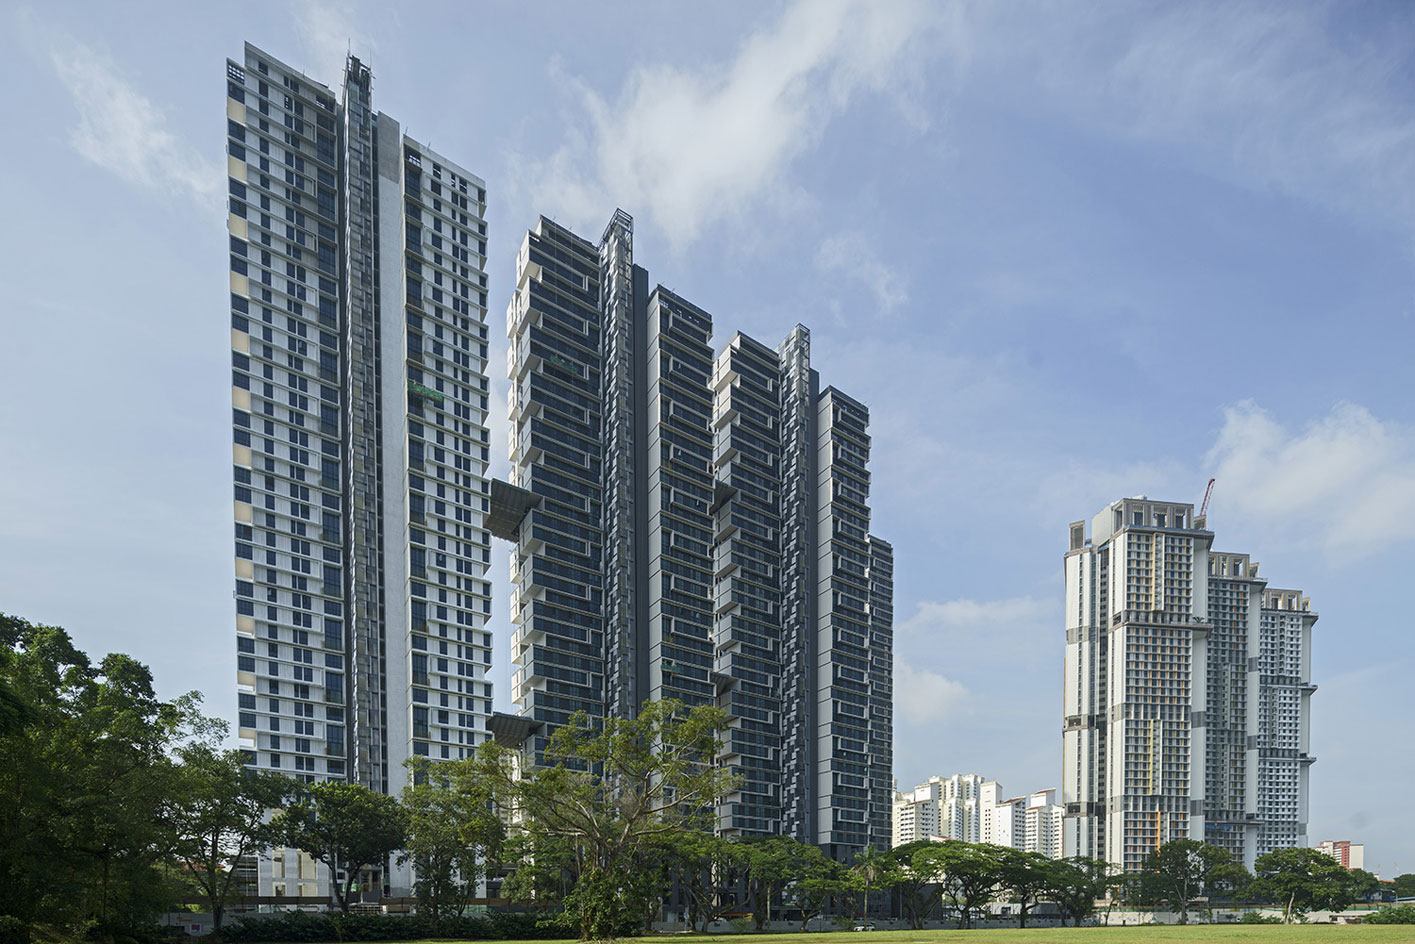 Building blocks: Singapore’s Dawson development gears up for completion ...